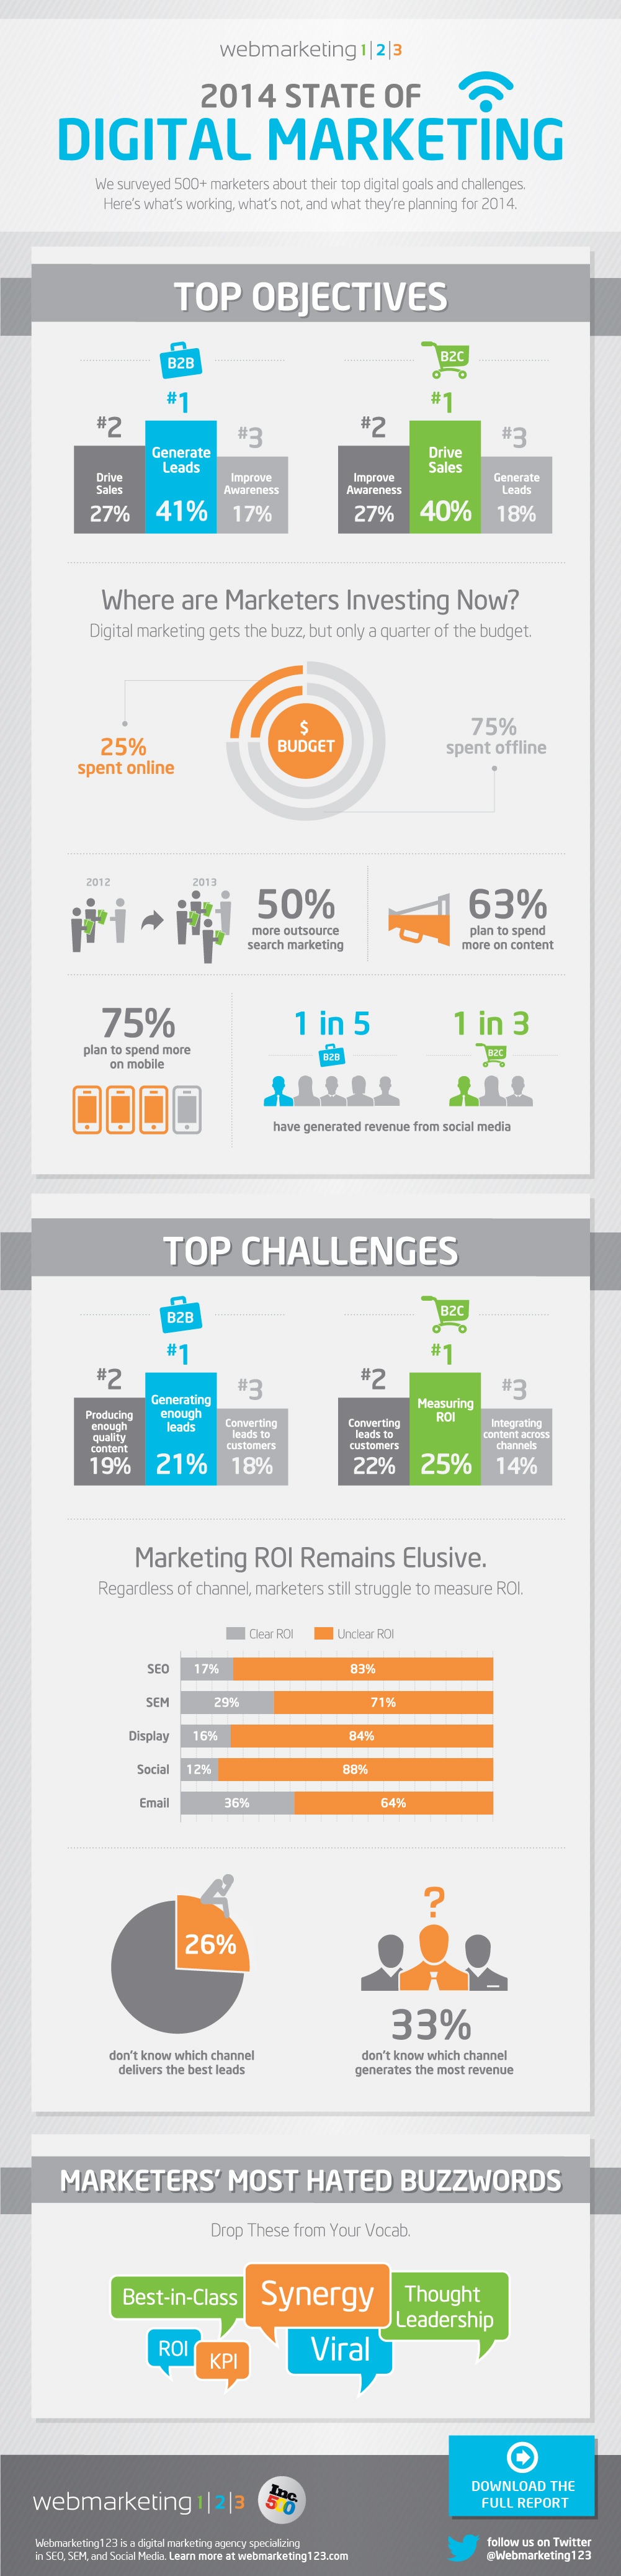 2014 State of Digital Marketing #Infographic